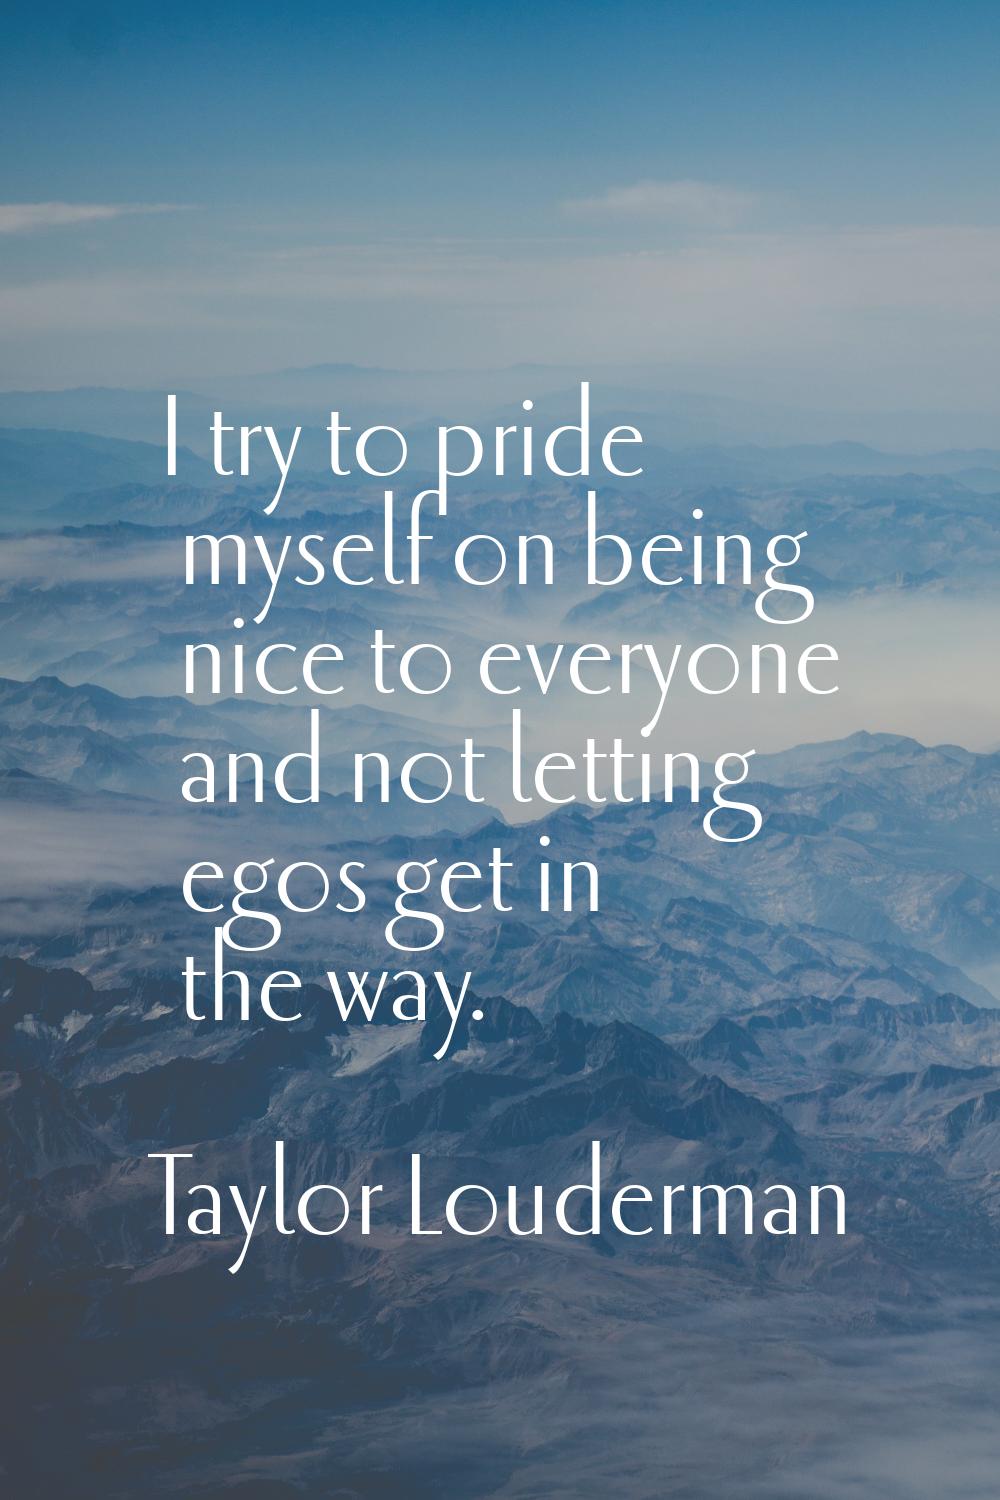 I try to pride myself on being nice to everyone and not letting egos get in the way.